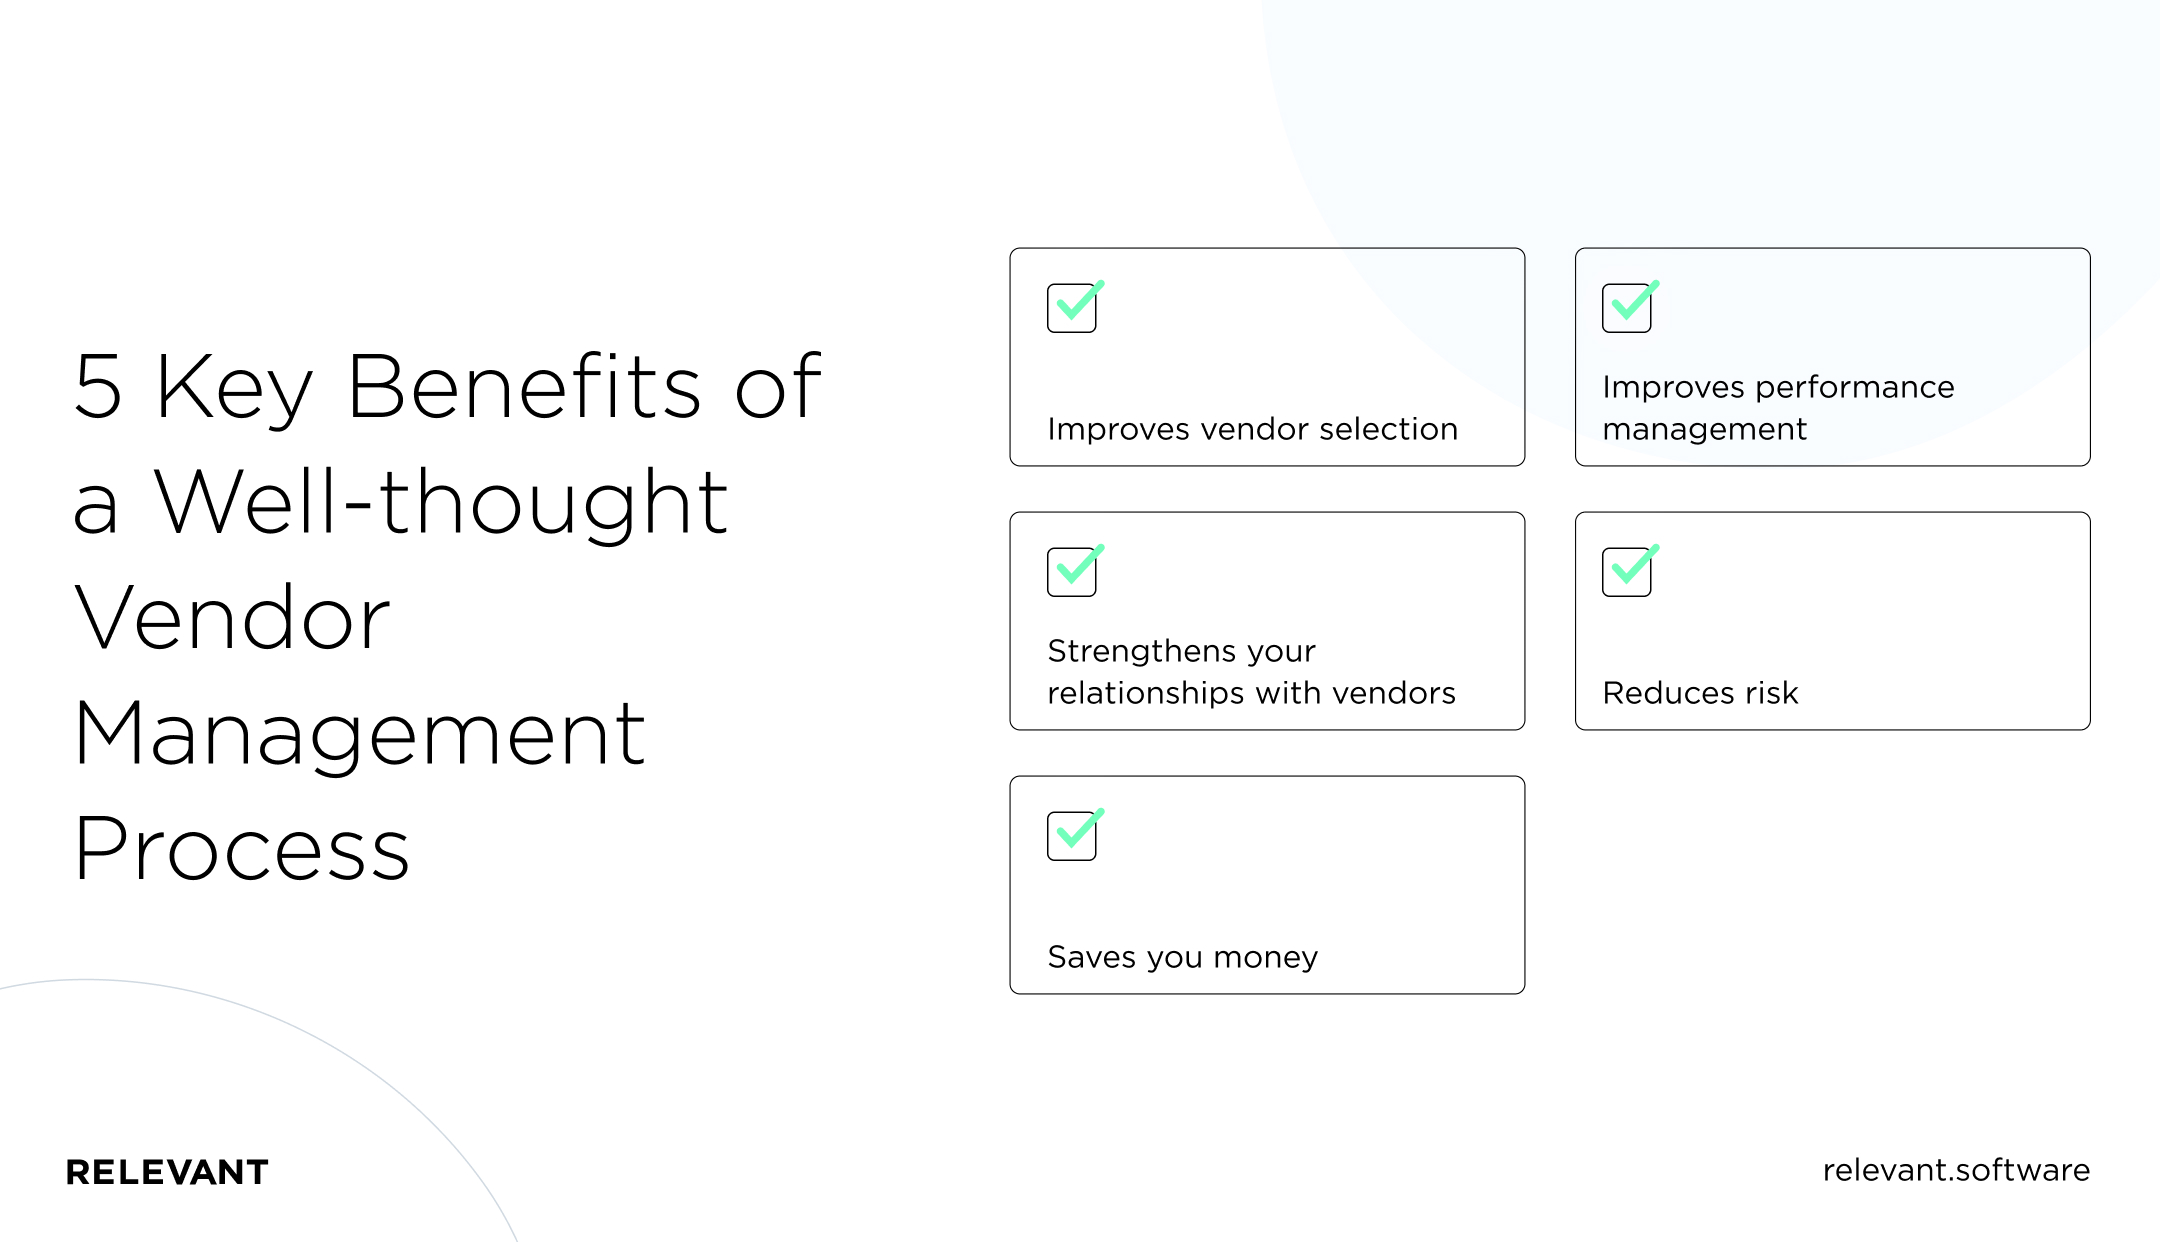 Key Benefits of a Well-thought Vendor Management Process